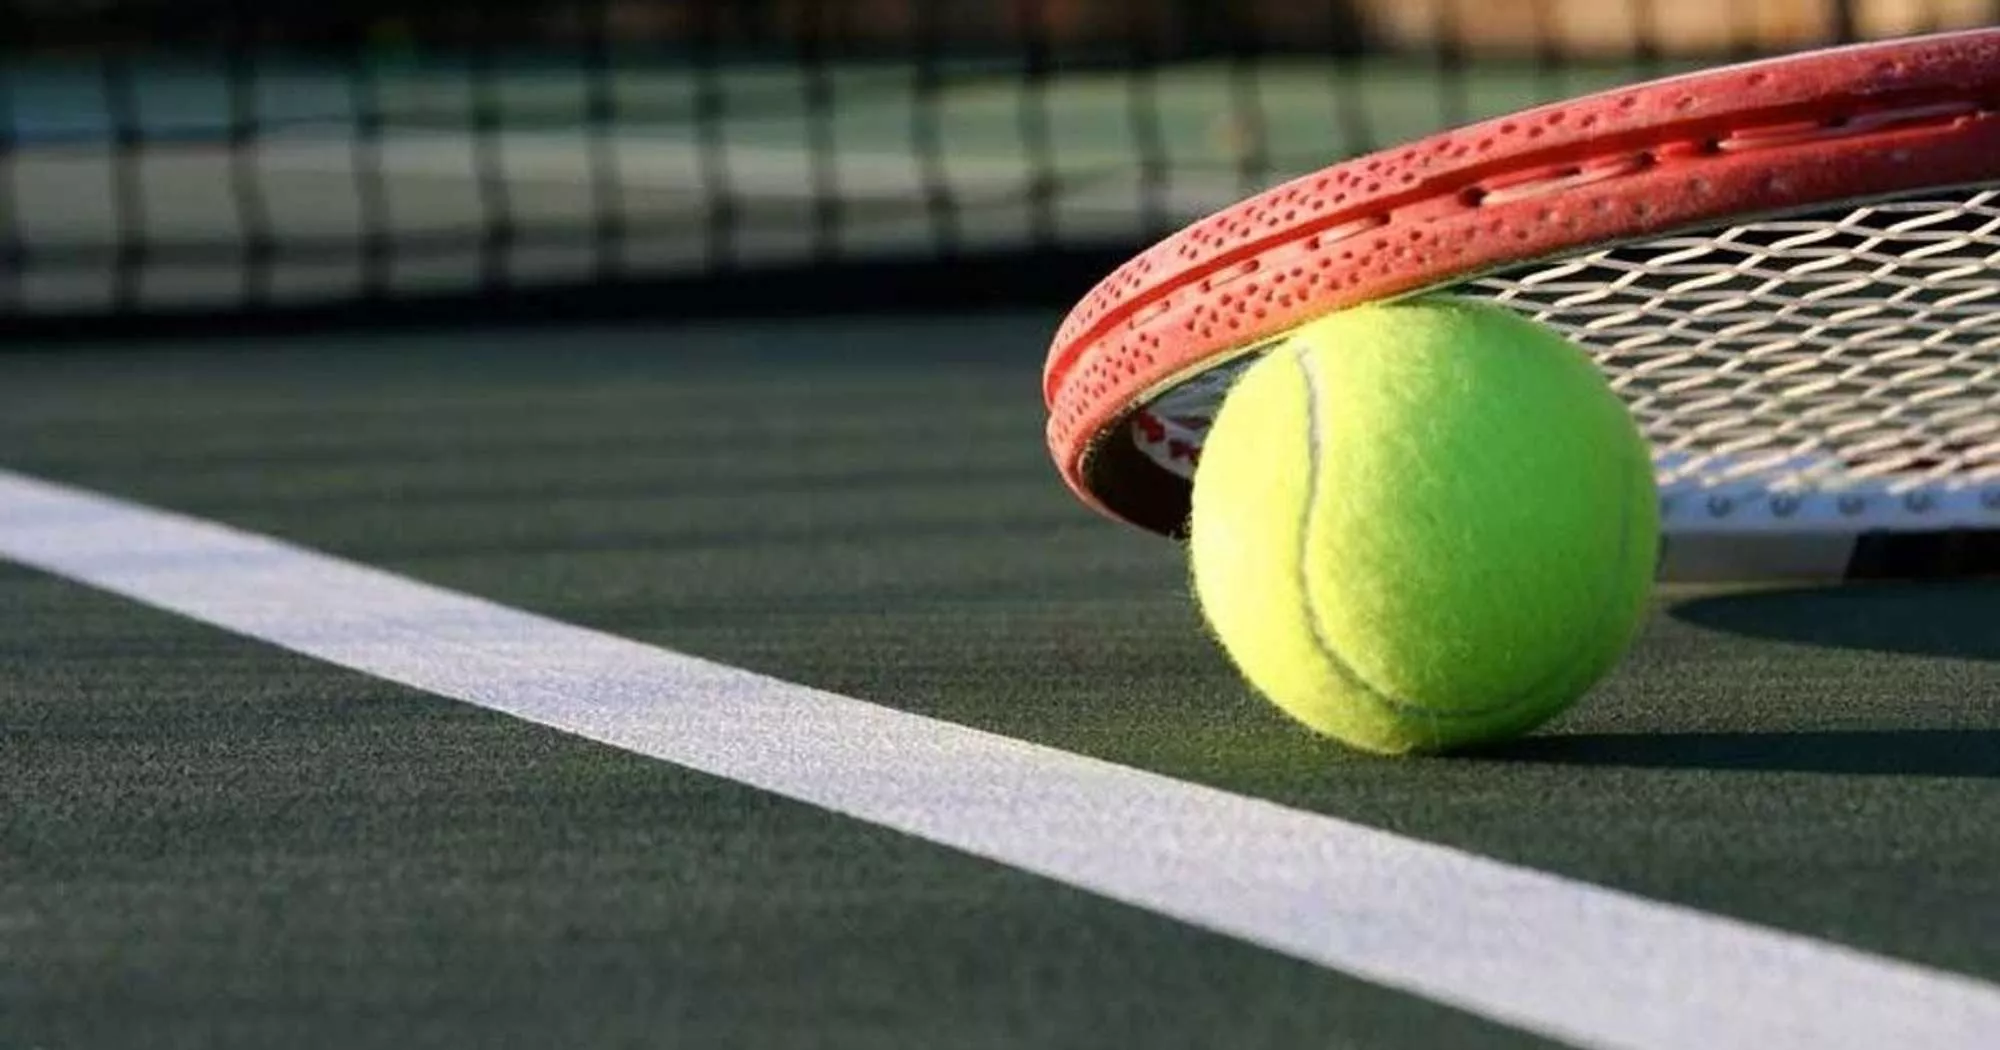 Edison Lawn Tennis in Argentina, South America | Tennis - Rated 0.9